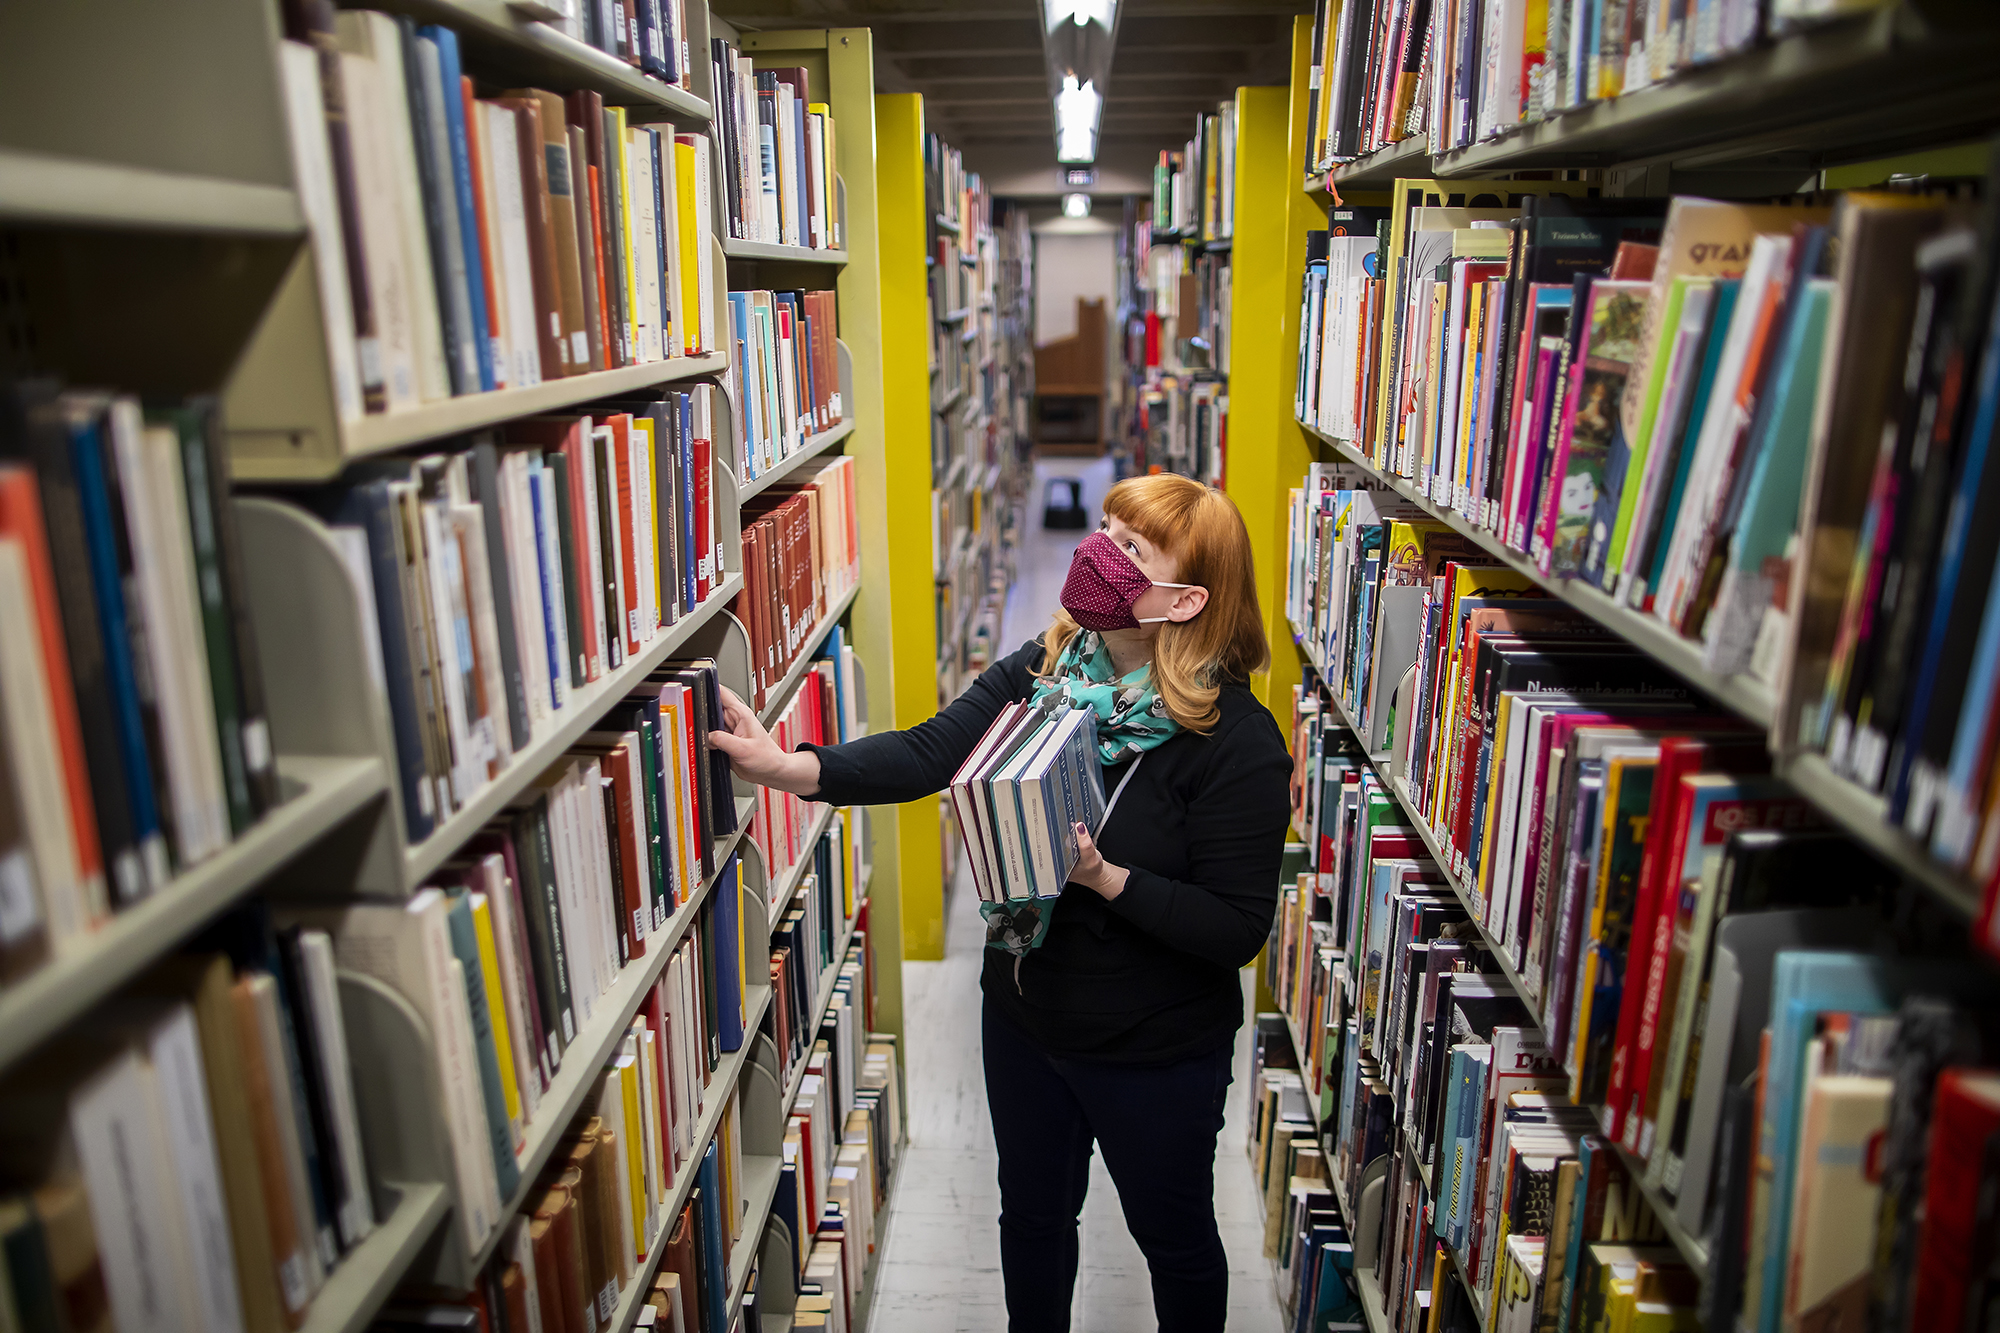 Person wearing a mask stands in the library stacks holding books.